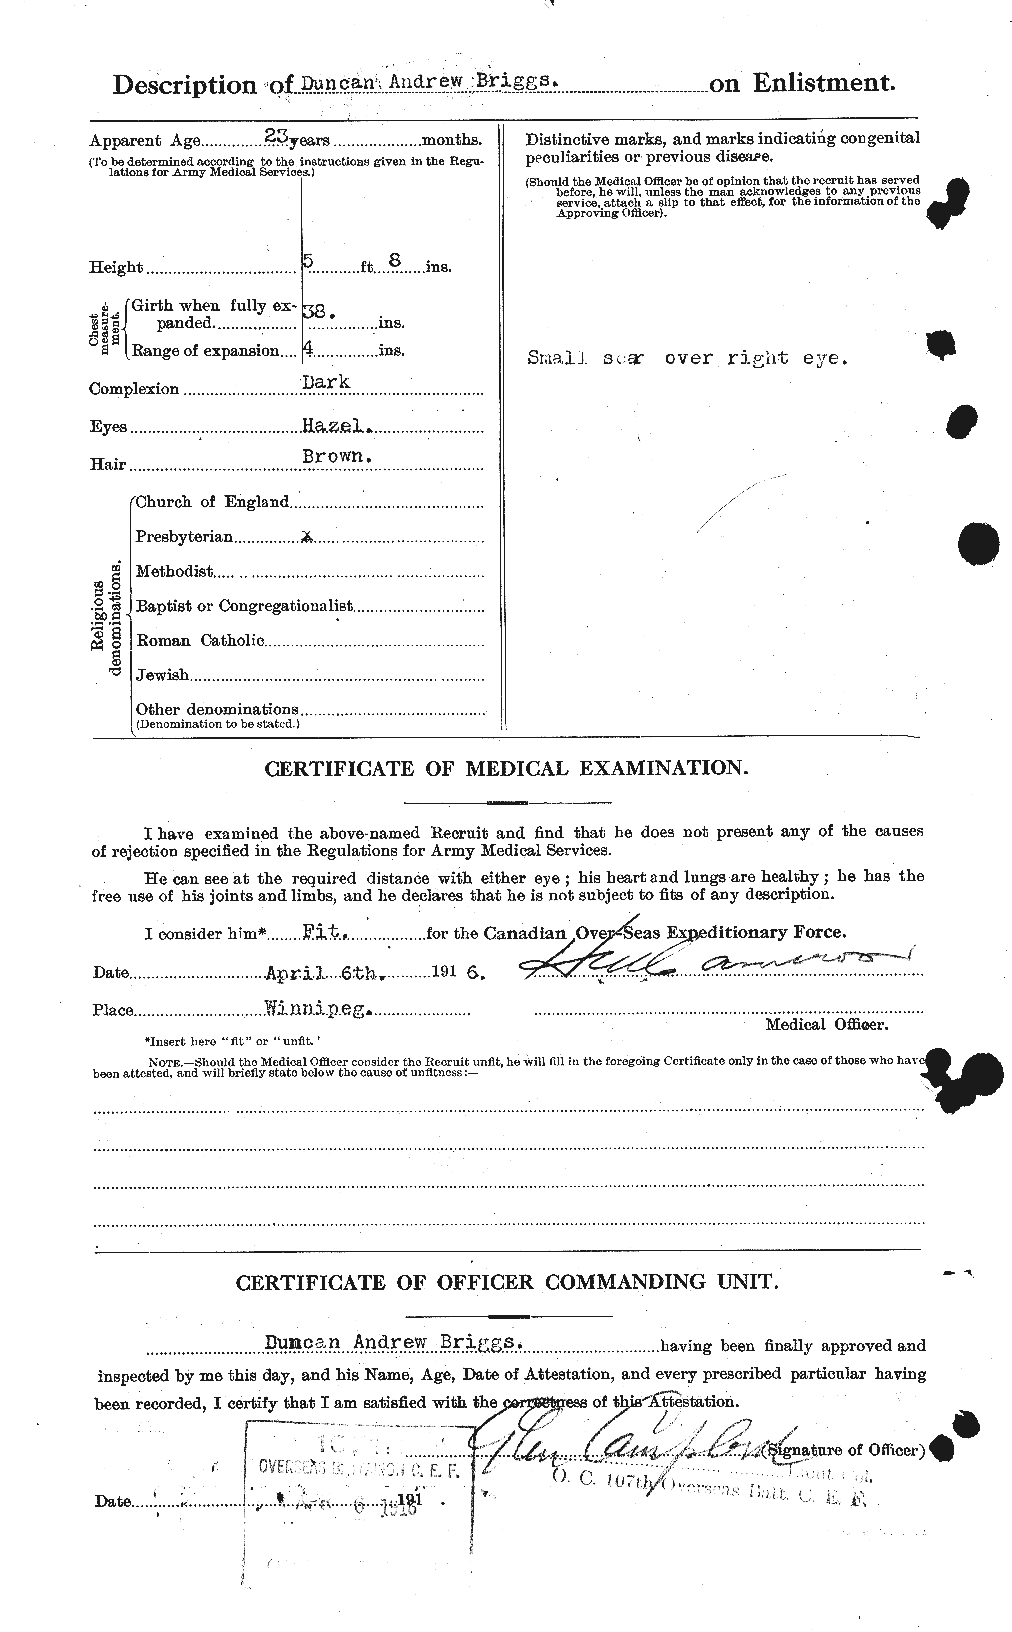 Personnel Records of the First World War - CEF 263993b